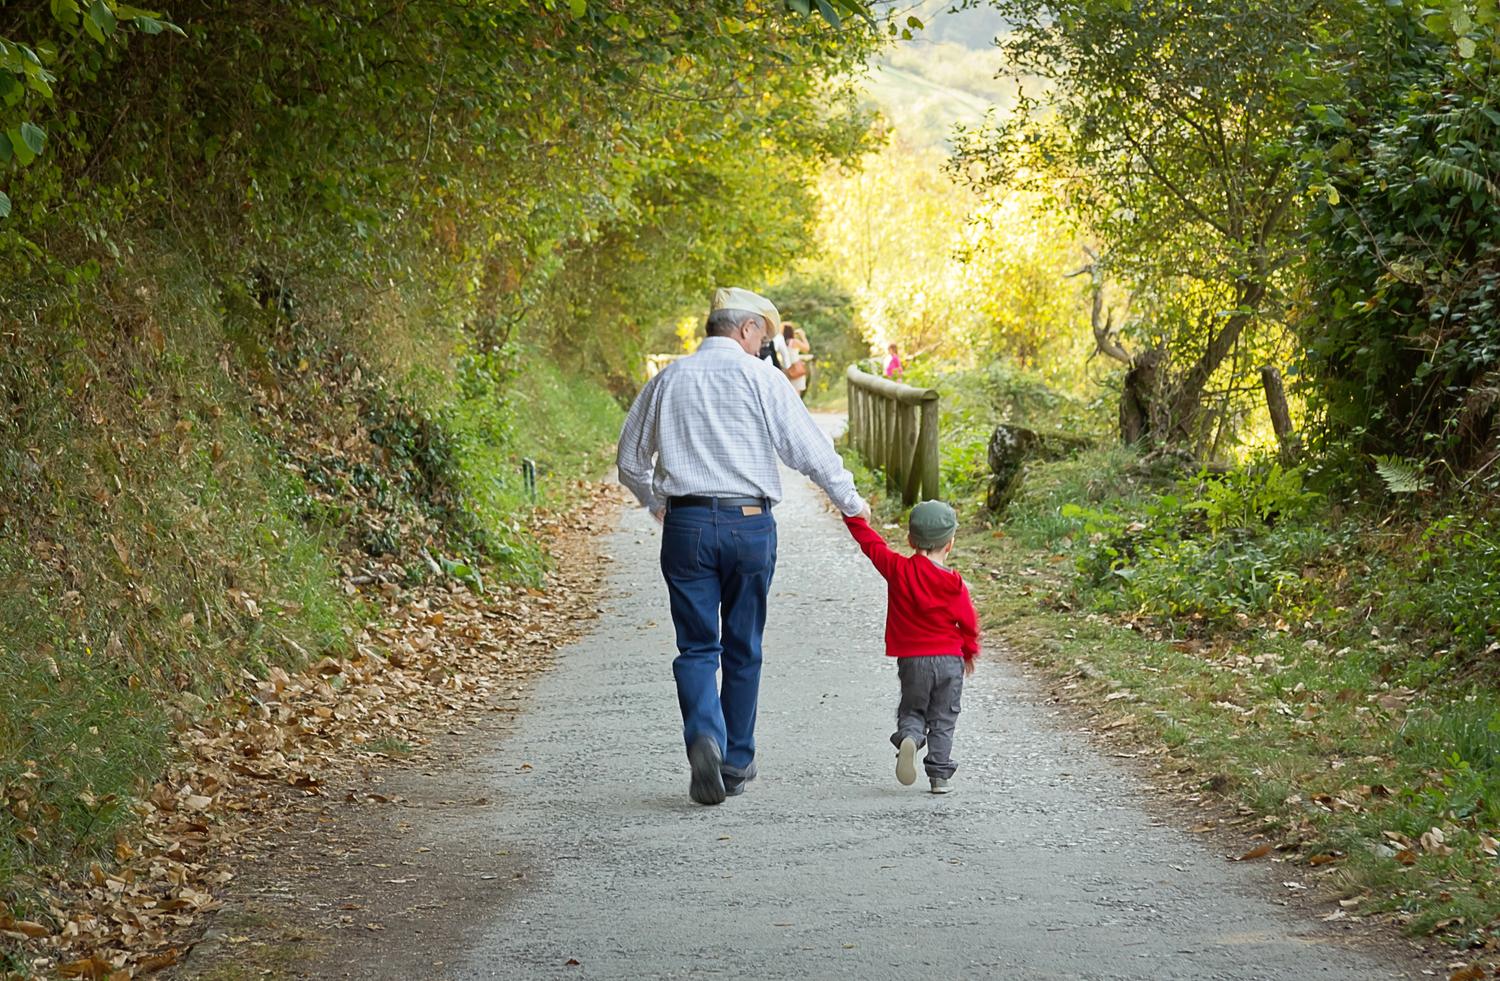 Nature path - Grandfather and grandchild walking, holding hands